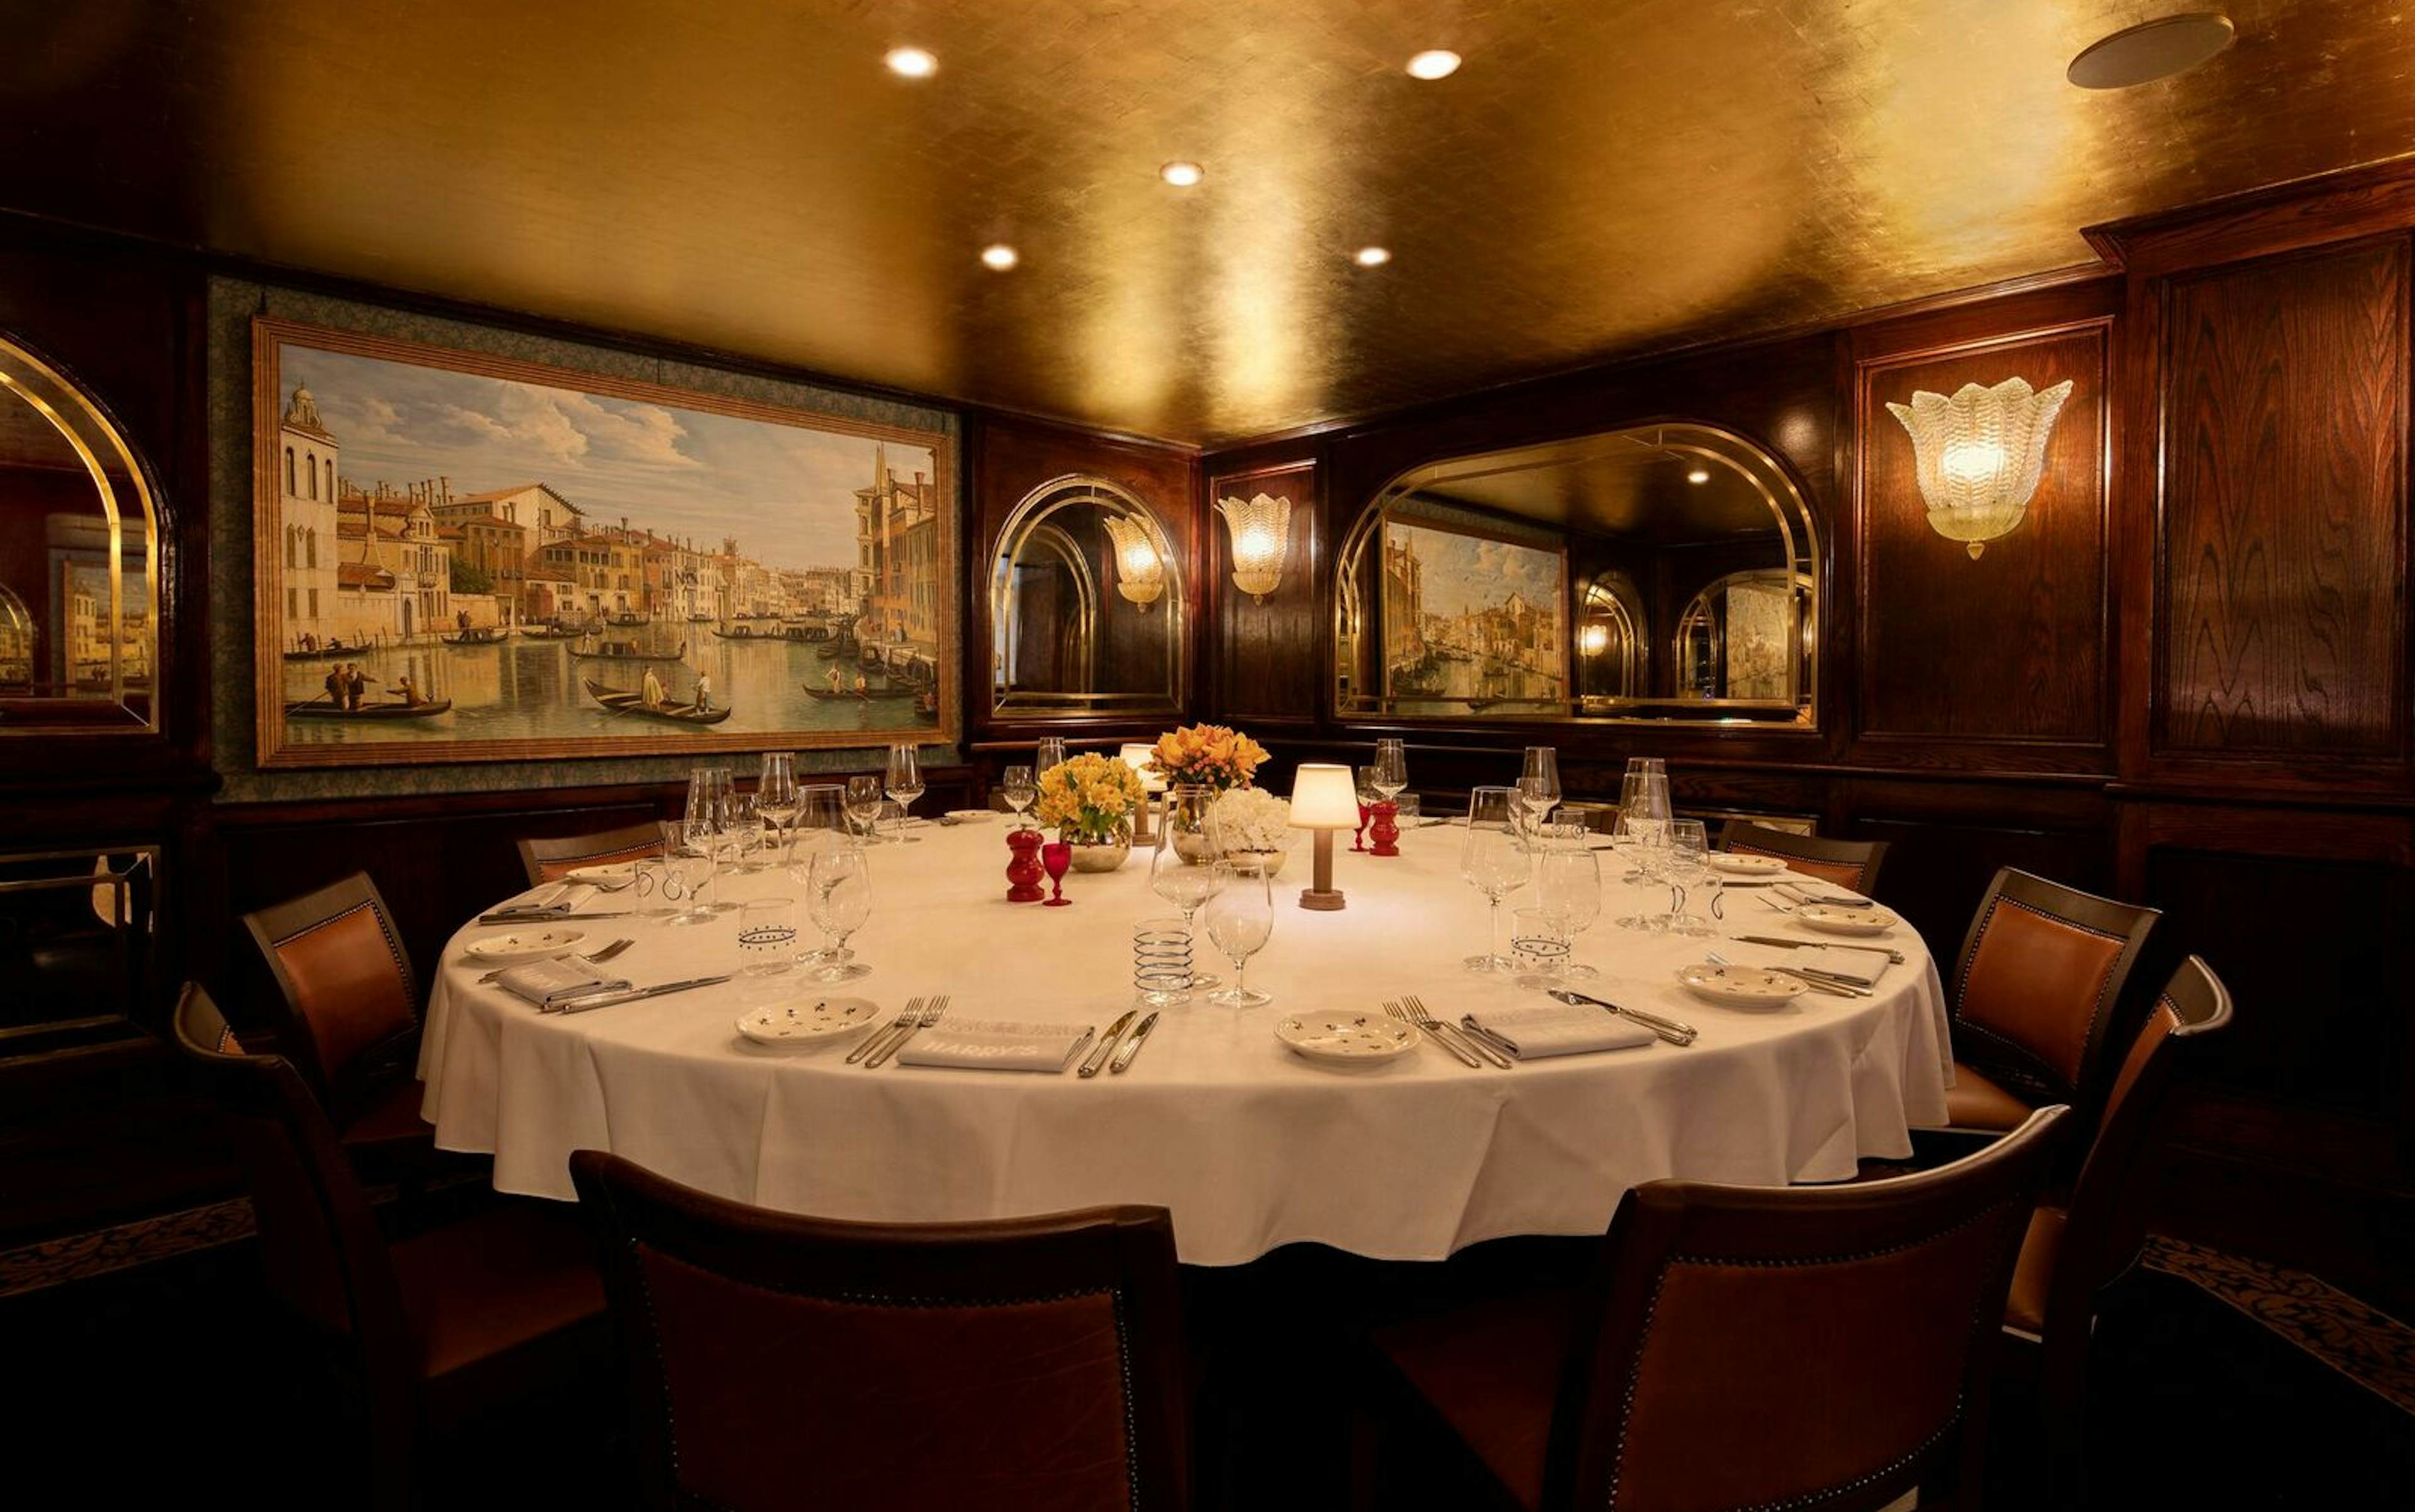 Harry's Dolce Vita - The Canaletto Room image 1